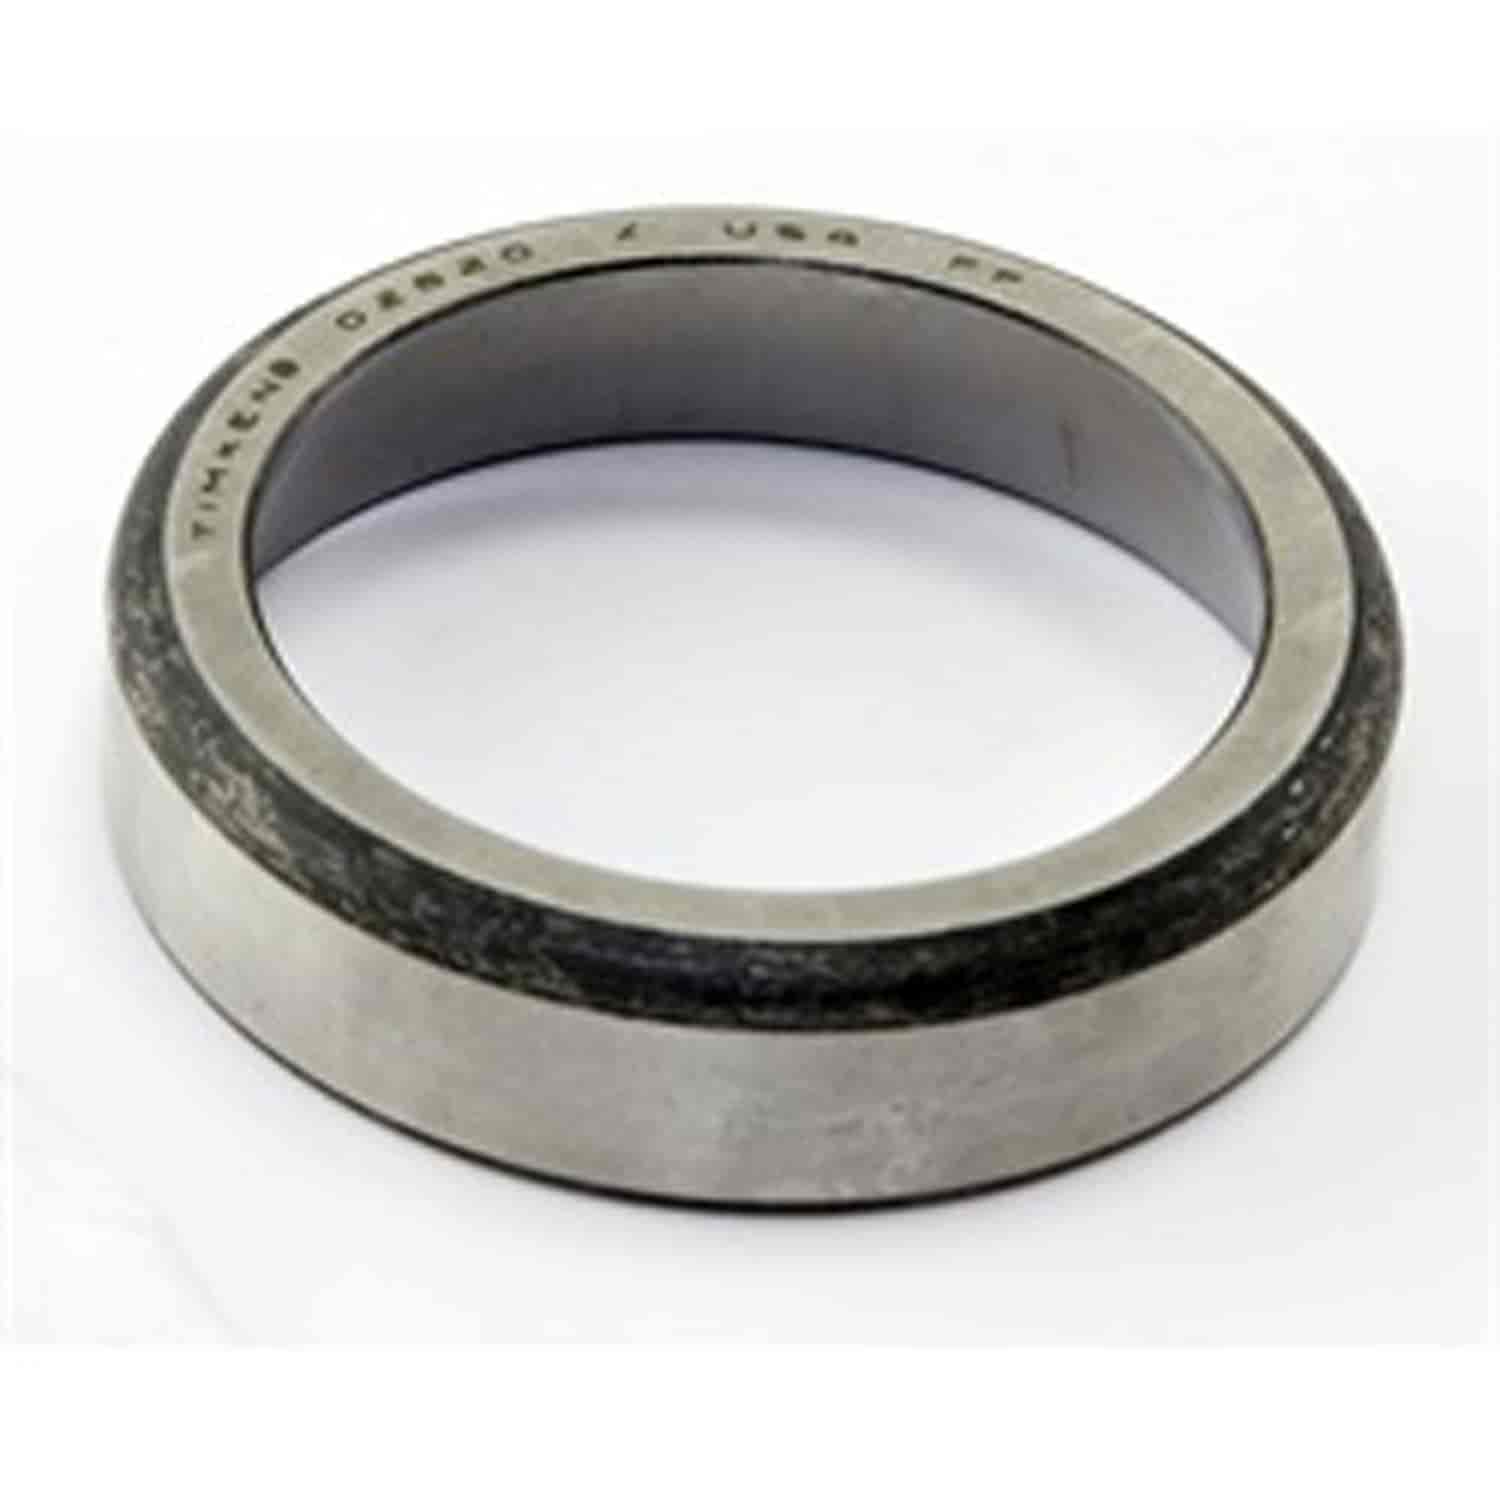 Outer Pinion Bearing Cup for D44 MB 41-45